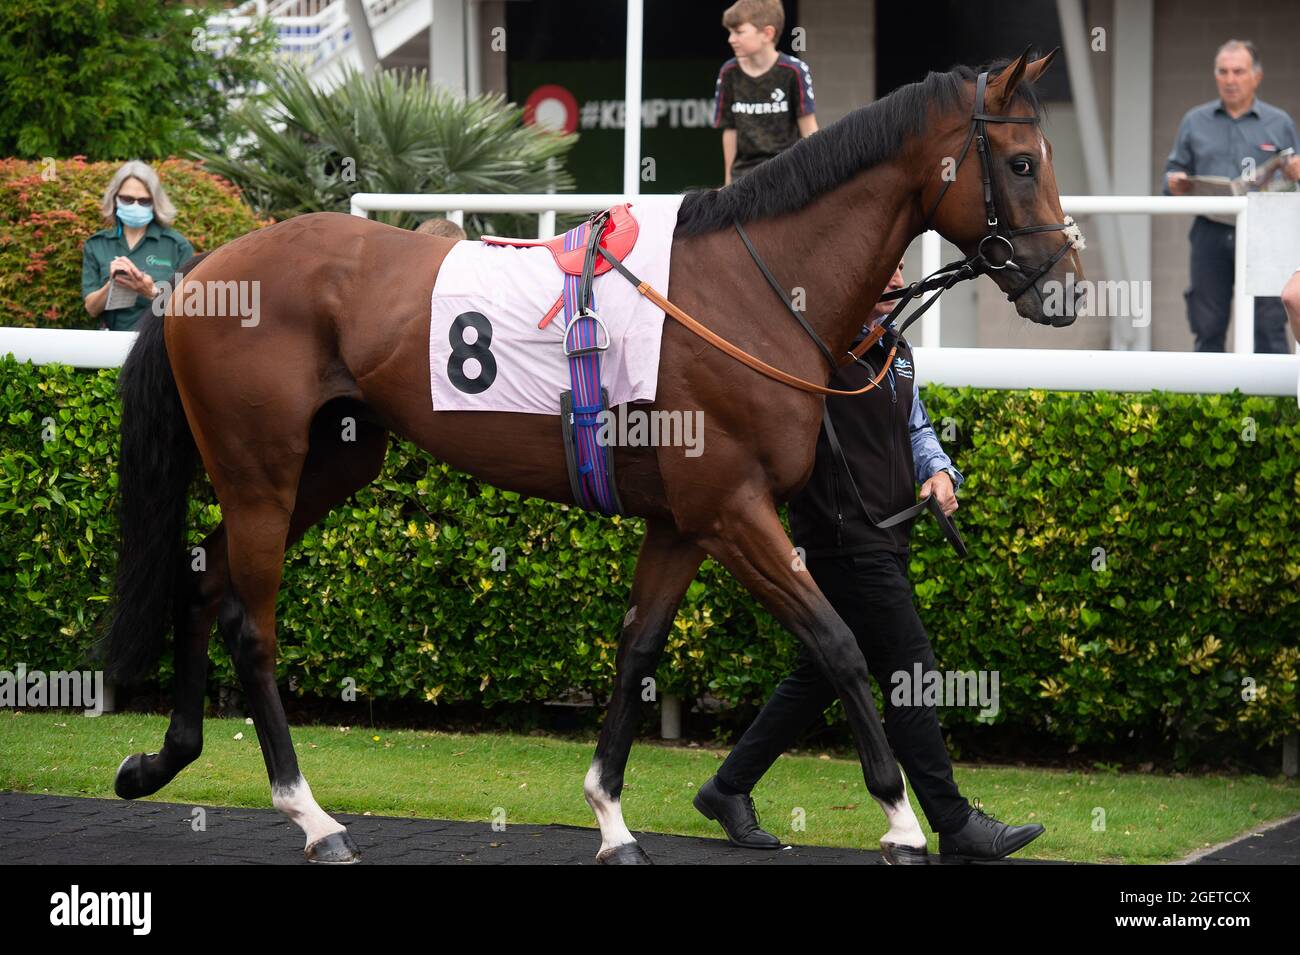 Sunbury-on-Thames, Middlesex, Uk. 20th August, 2021. Tio Mio in the Parade Ring before the Unibet New Instant Roulette Novice Stakes (Class 5). Trainer David Loughnane, Tern Hill. Credit: Maureen McLean/Alamy Stock Photo